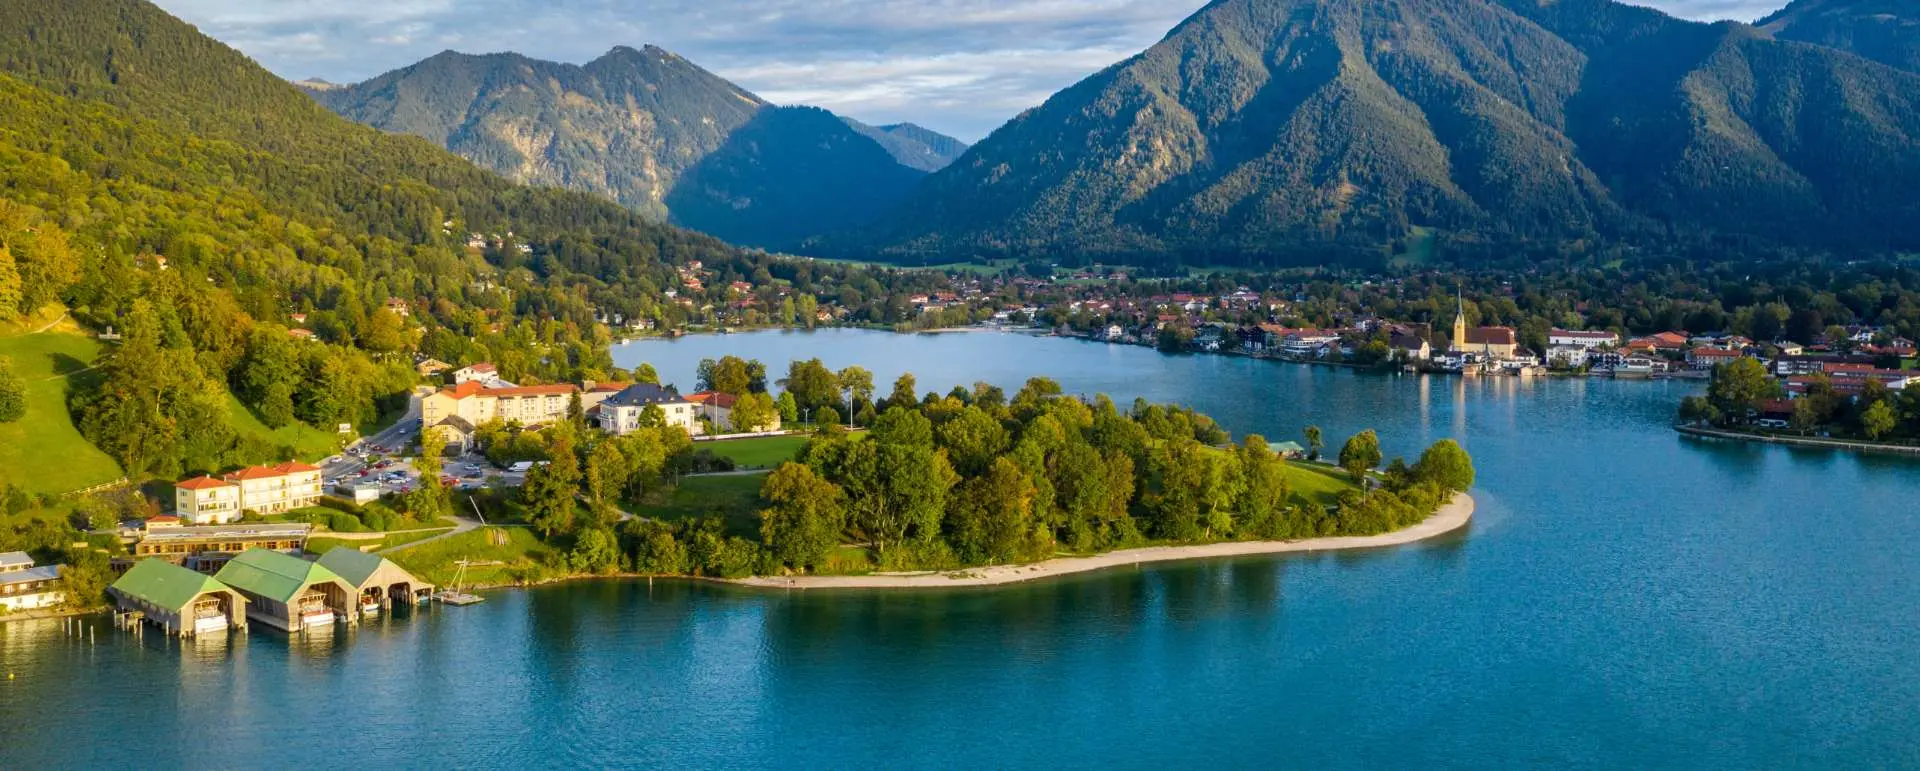 Tegernsee - the destination for group hotel for music groups